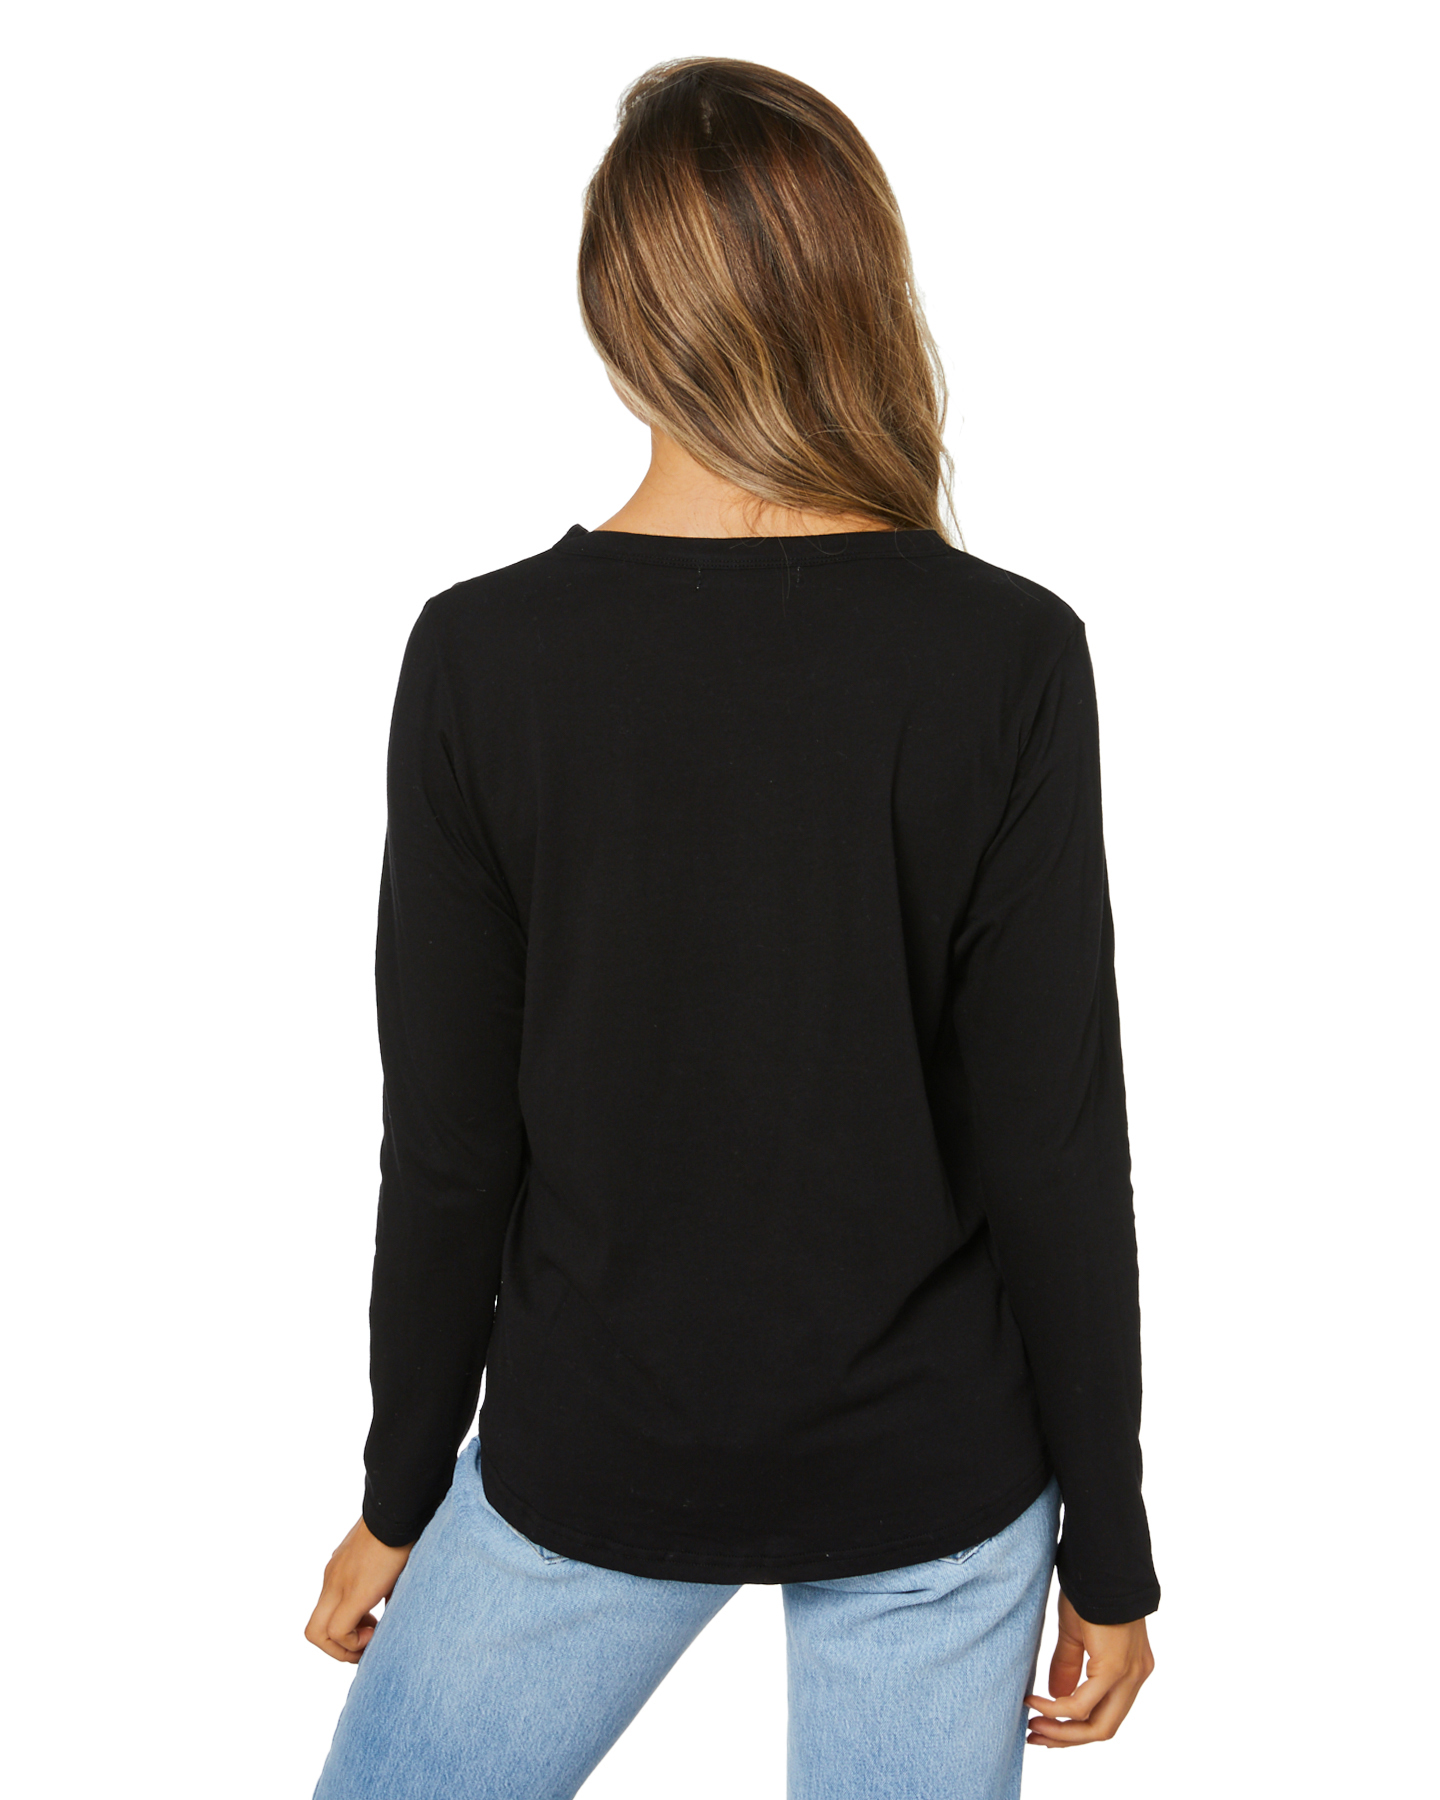 Nude Lucy Ava Long Sleeve Tee - Black | SurfStitch